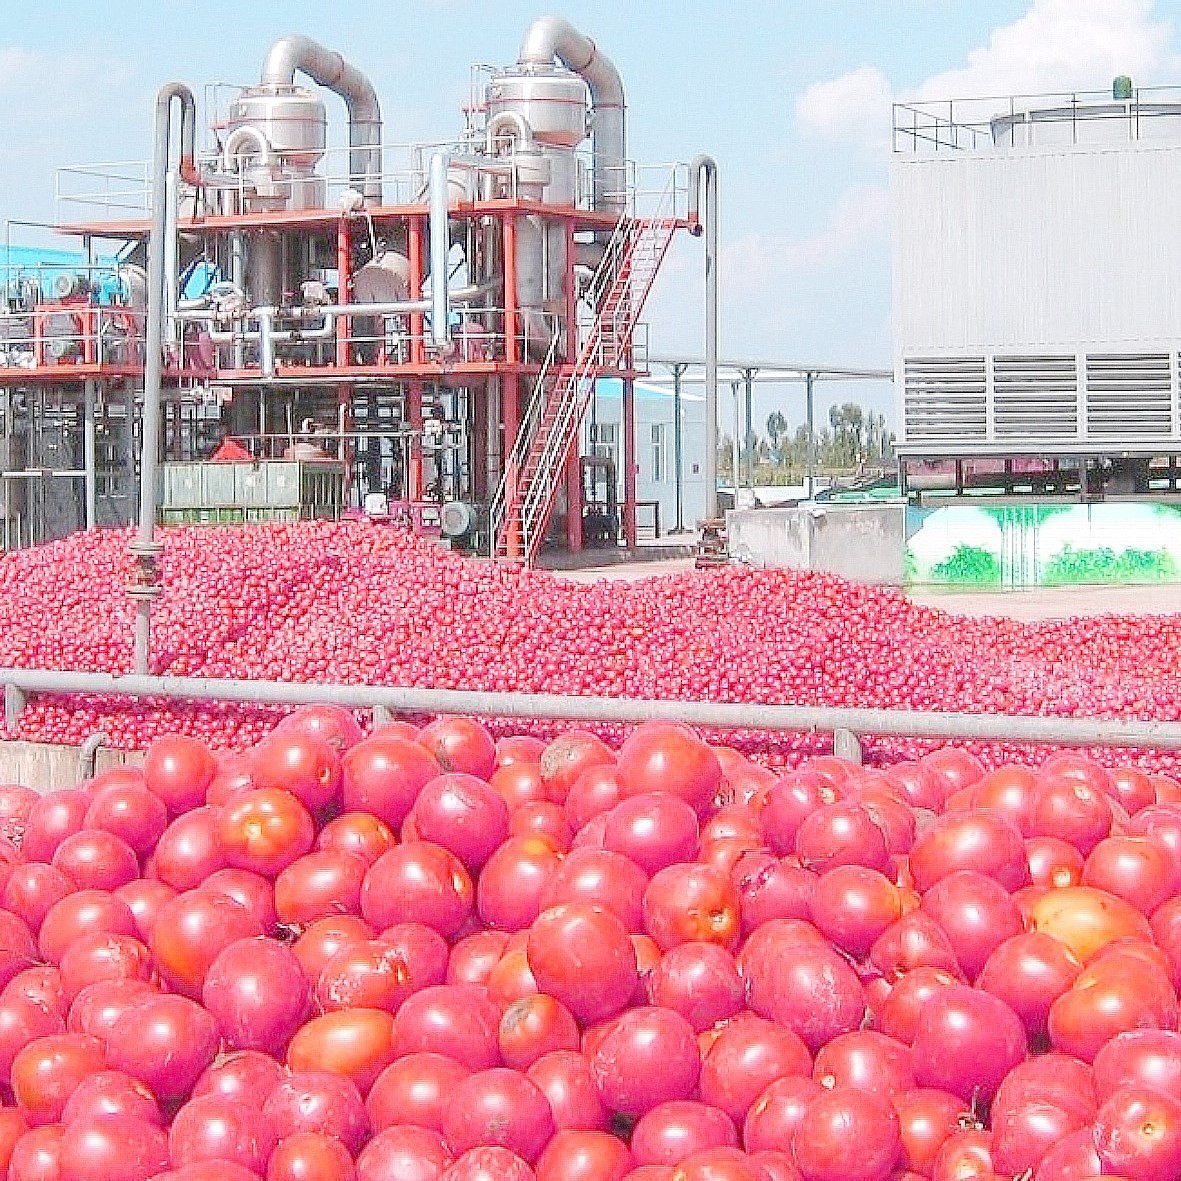 Tomato Processing Production Line